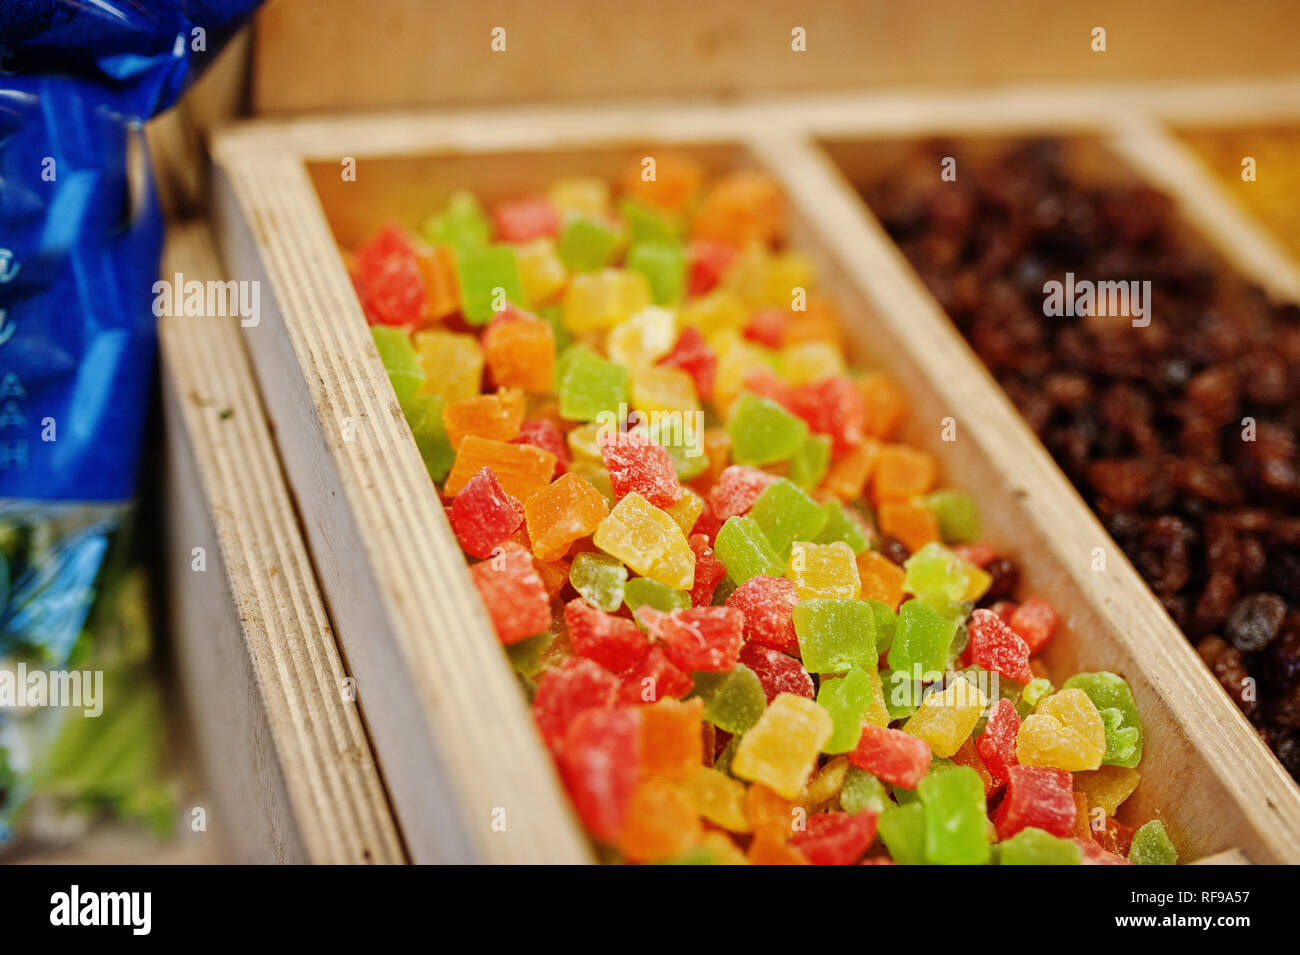 Raisins and candied fruits on the shelf of a supermarket or grocery store. Stock Photo